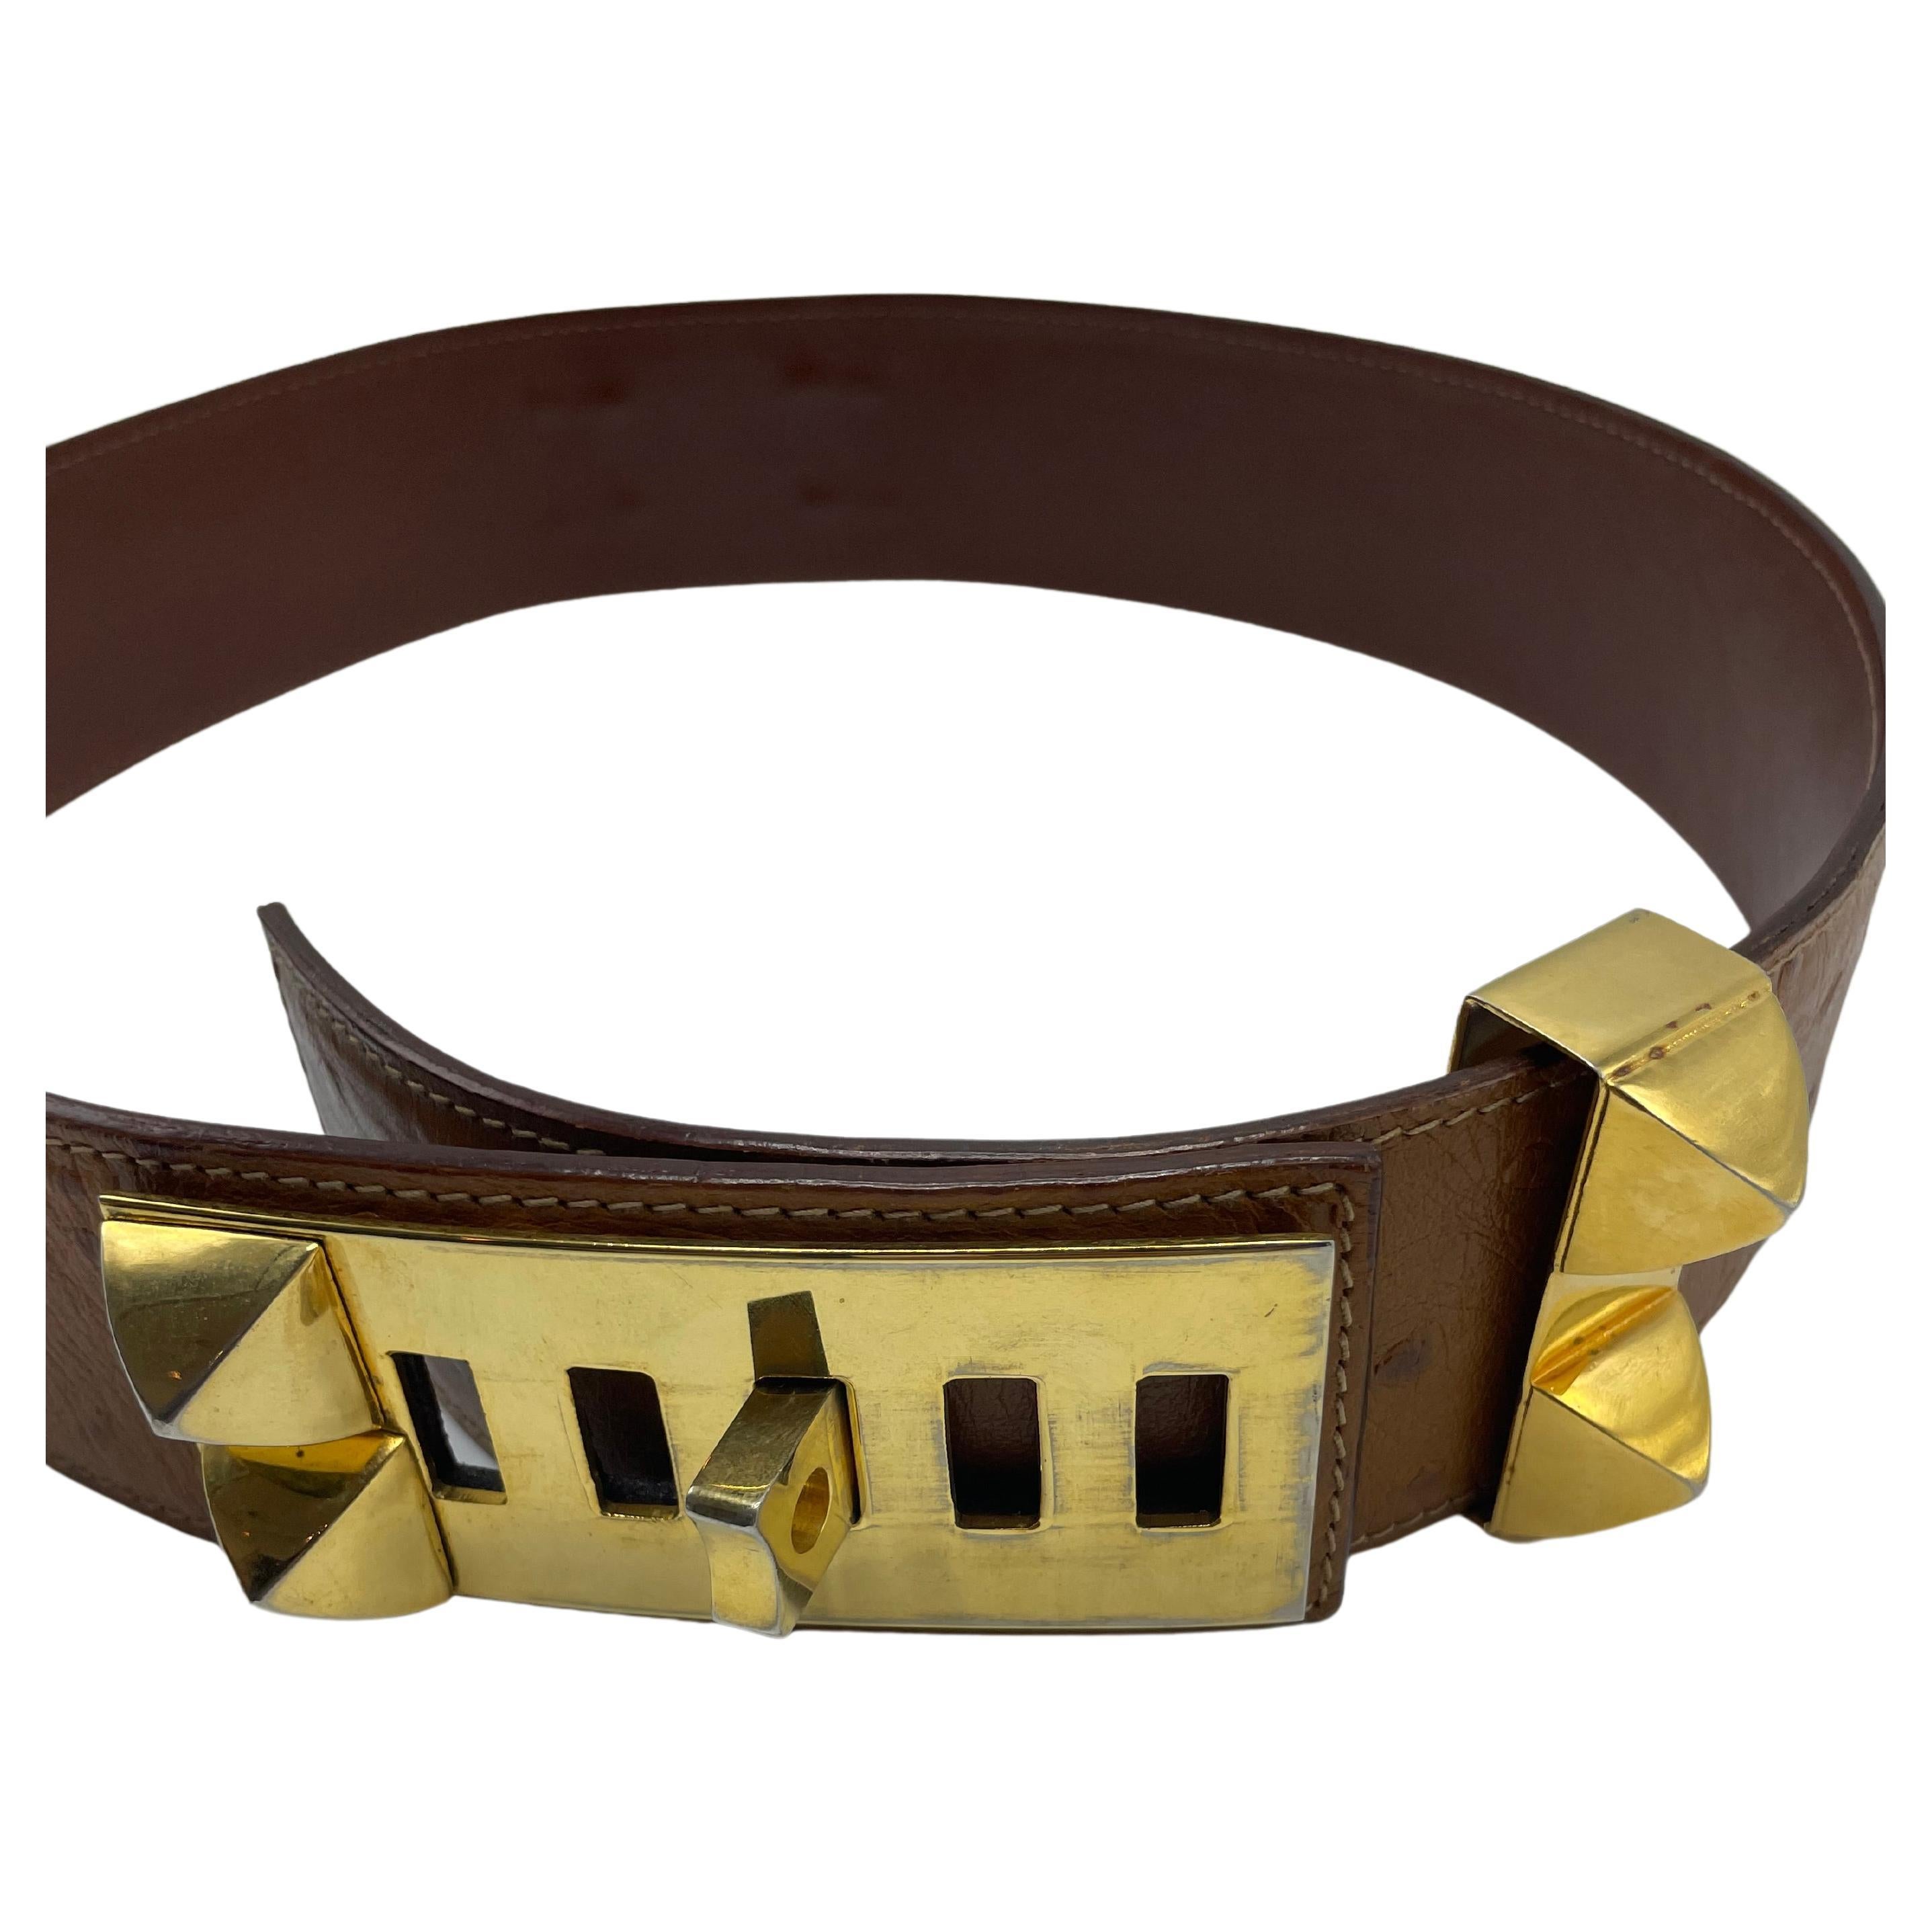 Hermès Medor Belt Ostrich. Medor belt in brown ostrich and gold hardware. In good condition, no stain, no smell. This stunning belt has five buckles making the size adjustable. Made in France. 